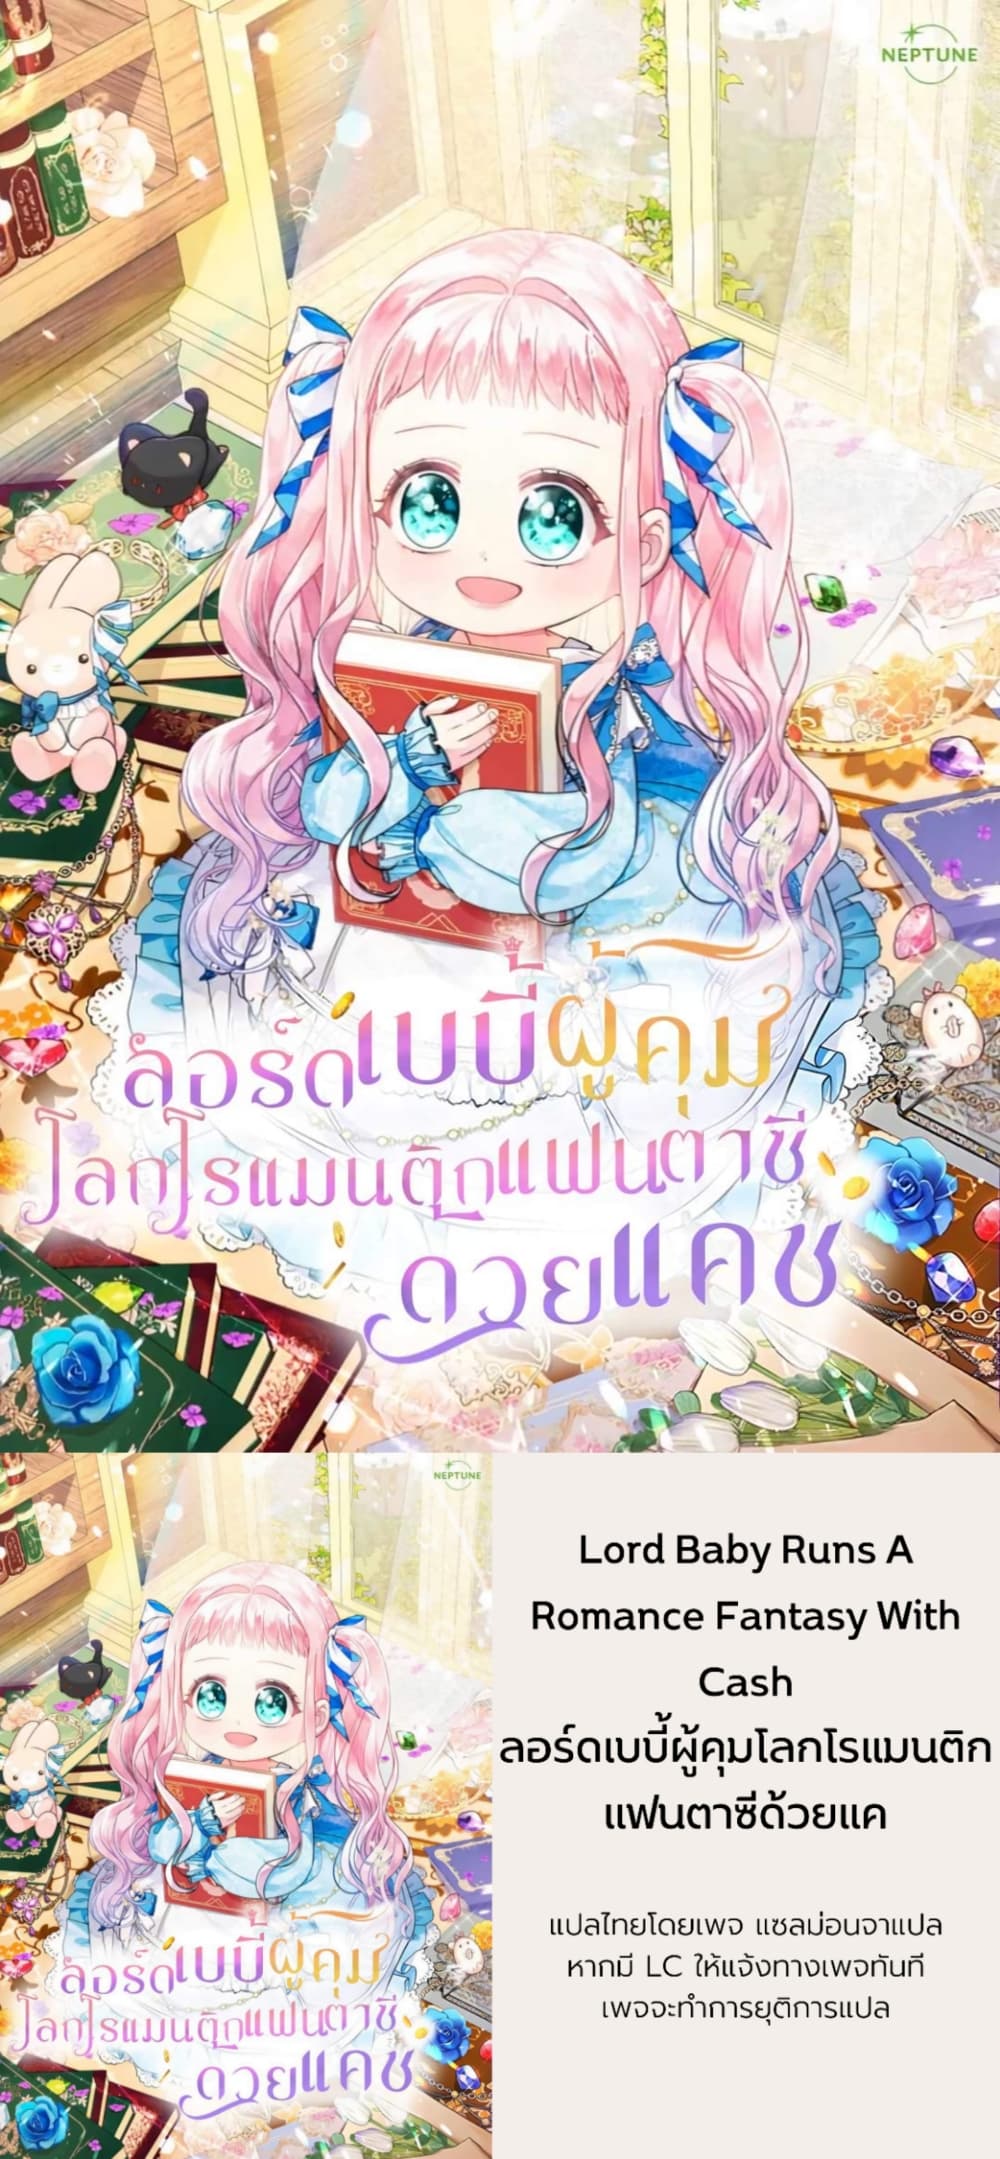 Lord Baby Runs a Romance Fantasy With Cash 14-14